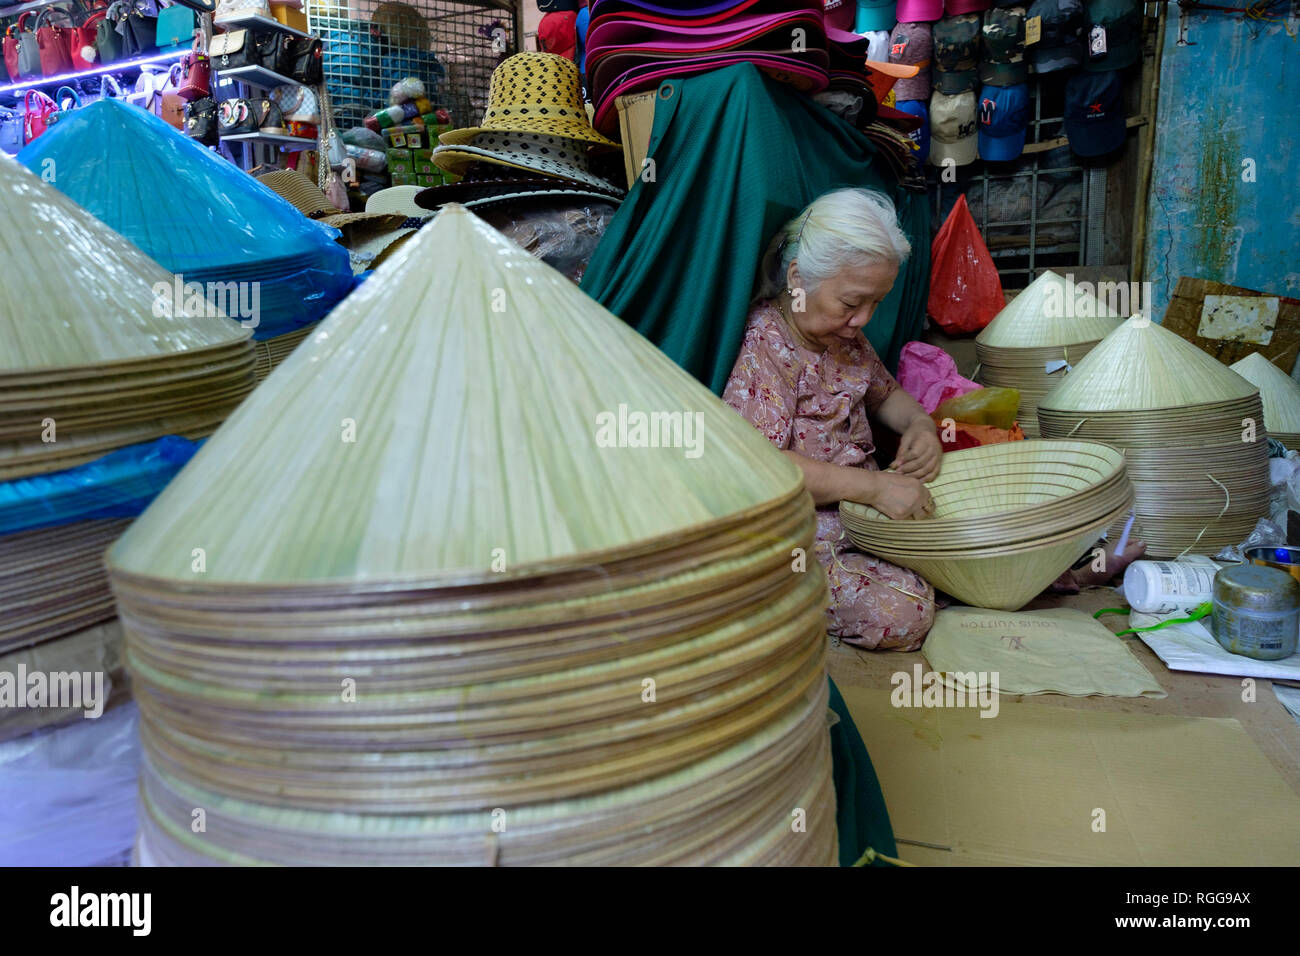 Artisan making a traditional vietnamese non la conical hat at the Dong Ba market in Hue, Vietnam, Asia Stock Photo